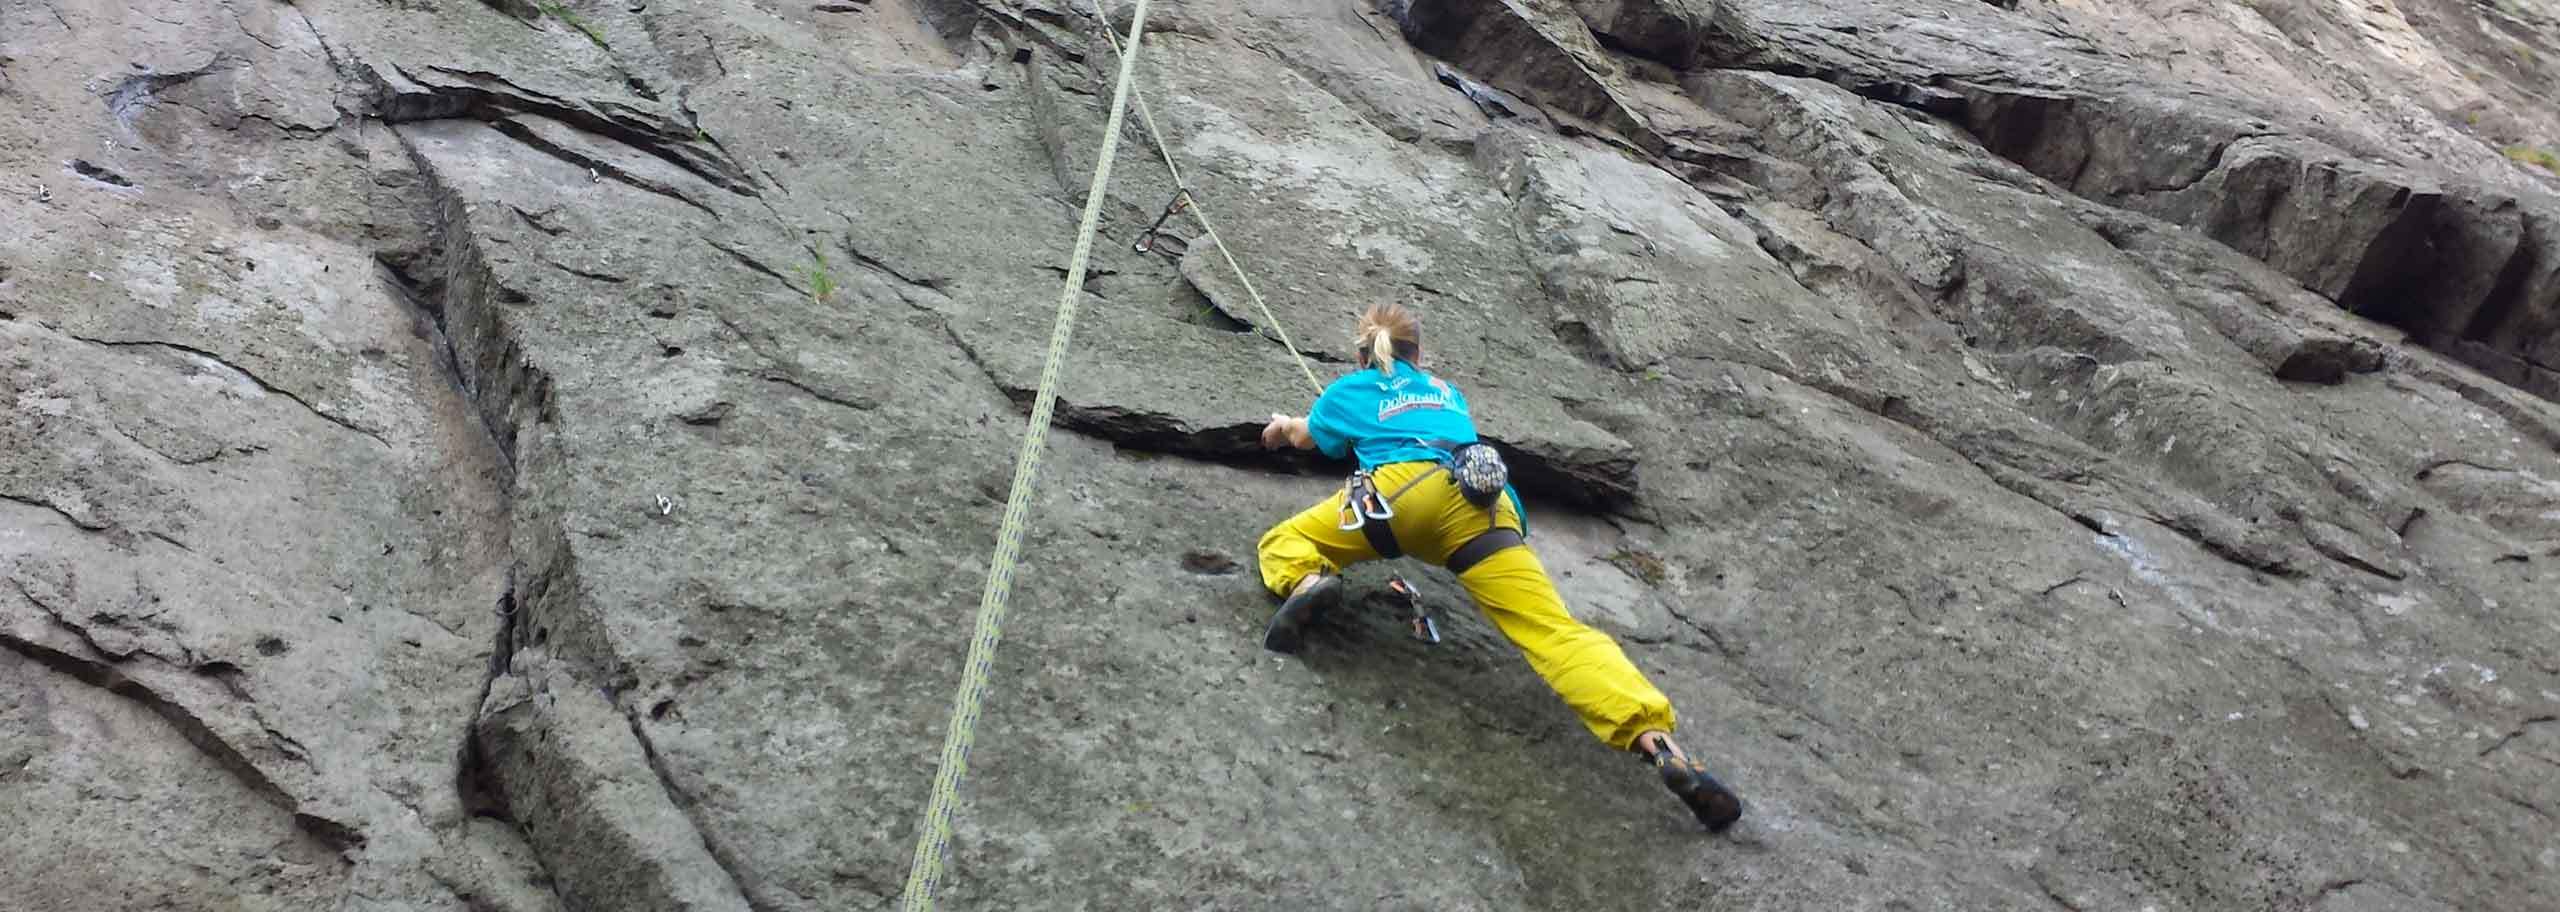 Rock Climbing in Monte Viso, Trad and Sport Climbing, Bouldering